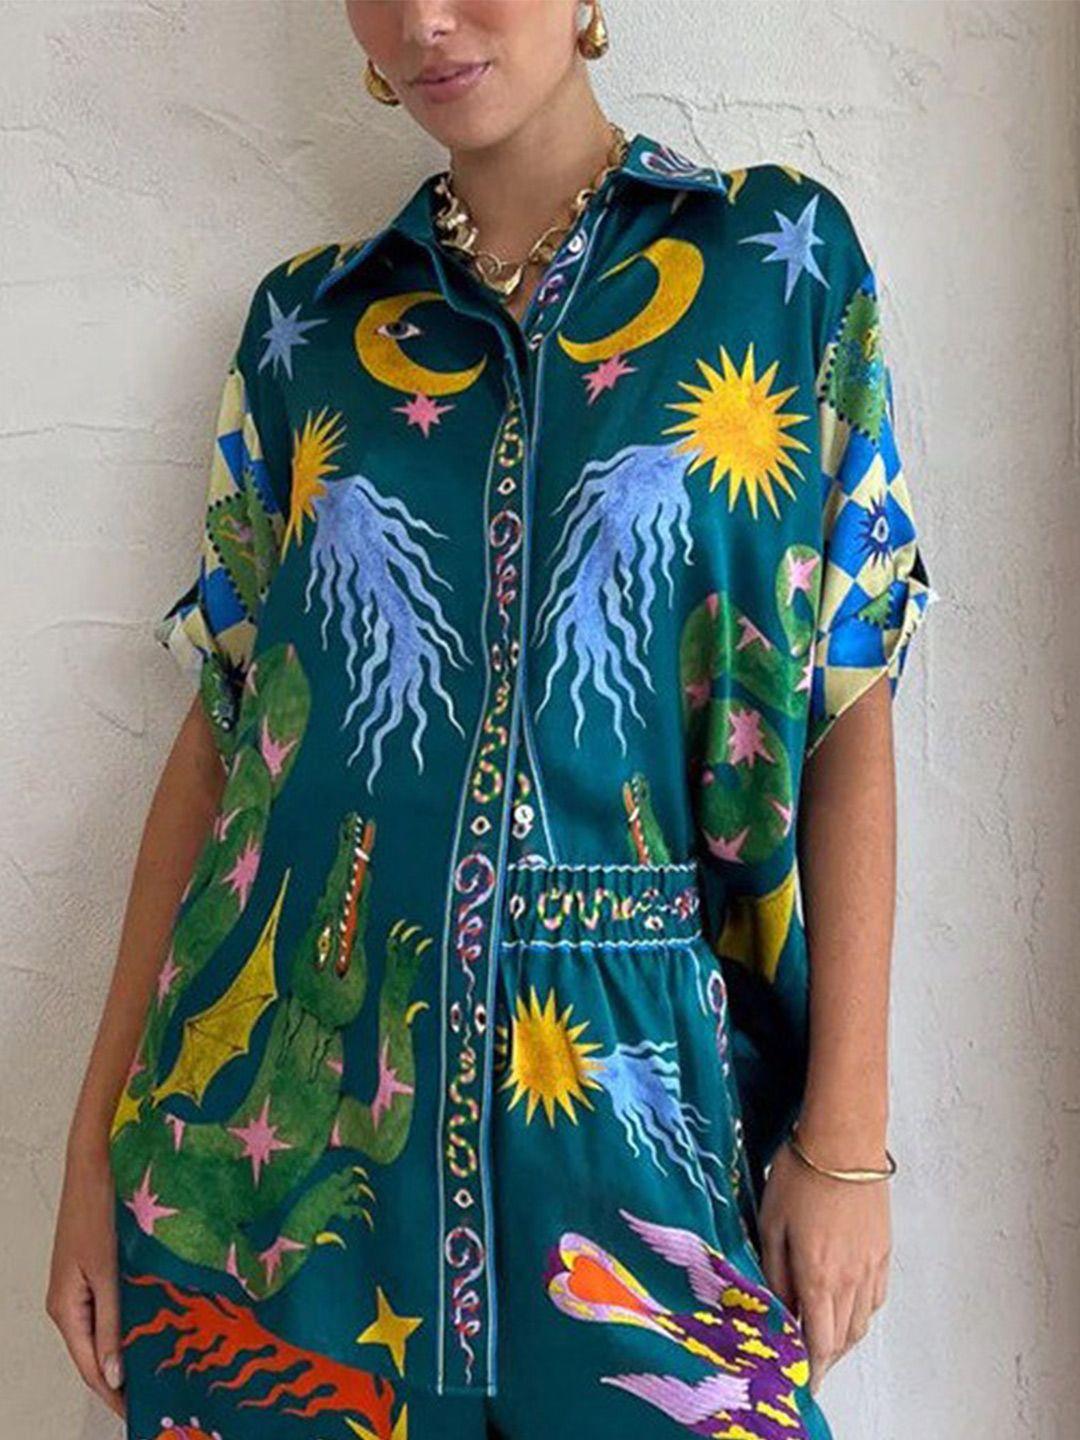 bostreet teal blue graphic printed shirt style top